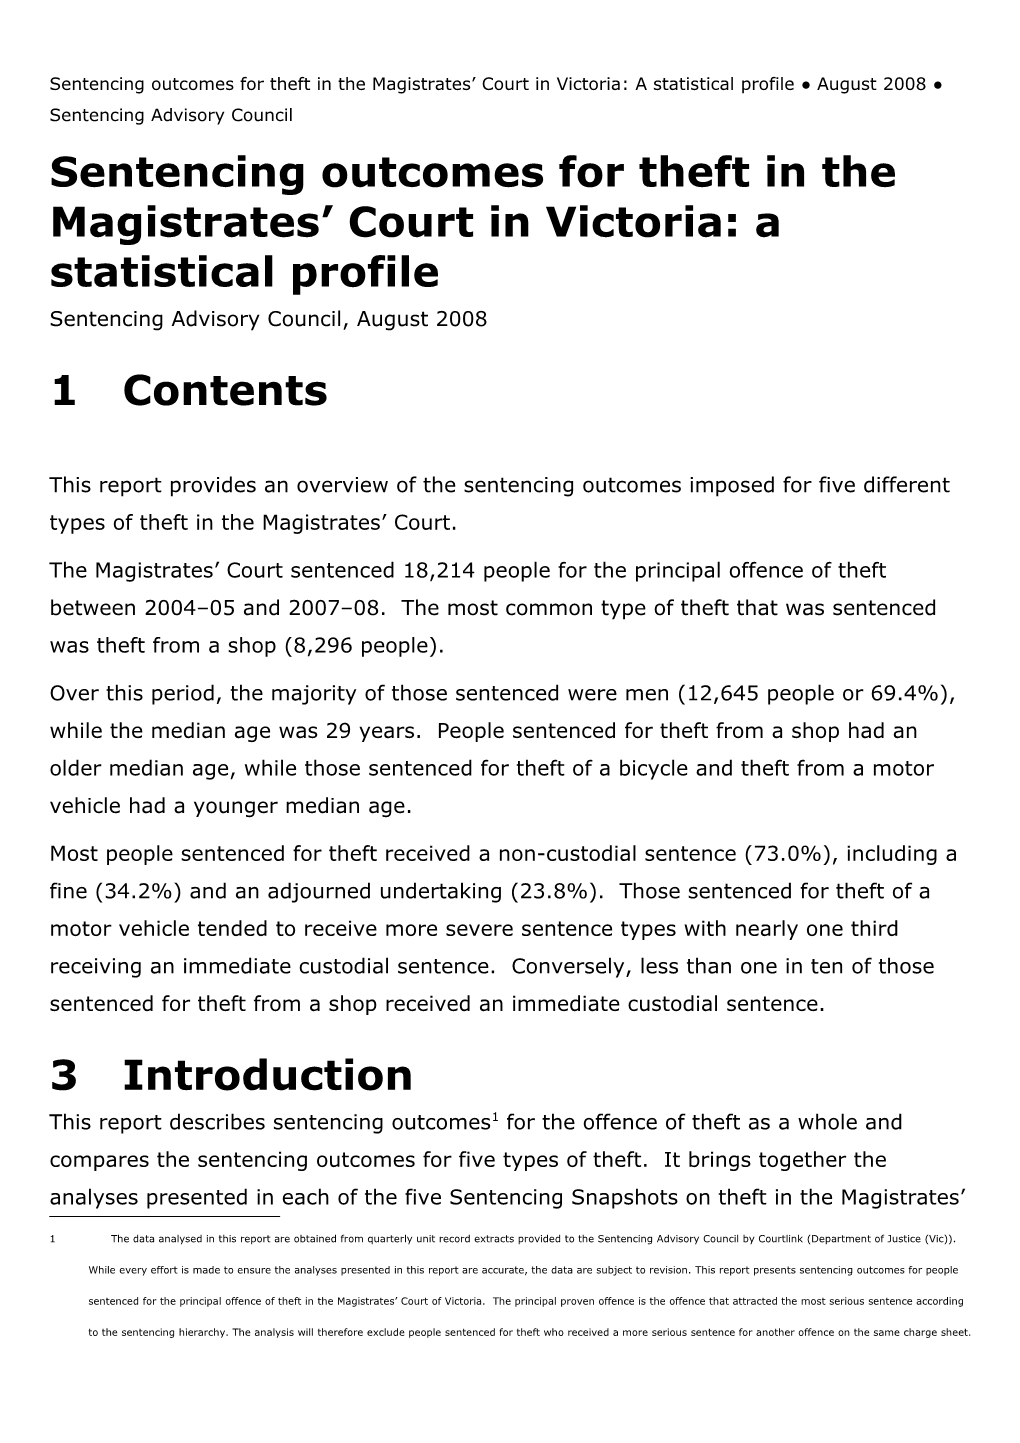 Sentencing Outcomes for Theft in the Magistrates Court in Victoria: a Statistical Profile